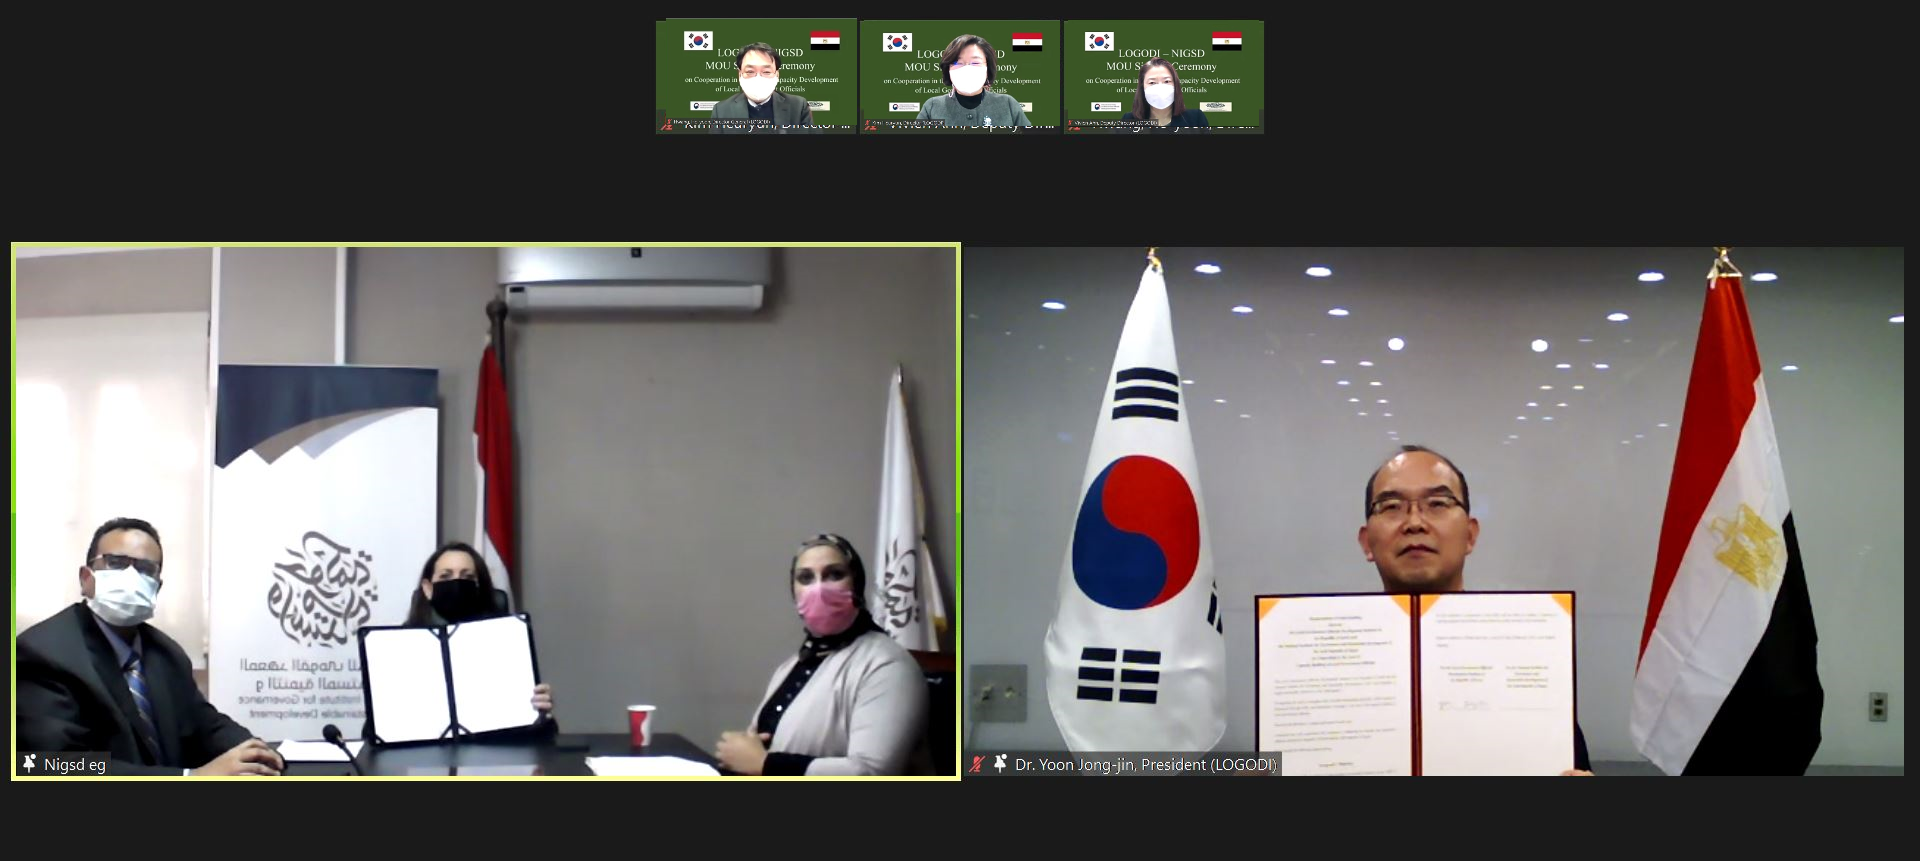  LOGODI and the NIGSD Sign MoU on the Local Government Officials Capacity Development 큰 이미지[마우스 클릭 시 창닫기]